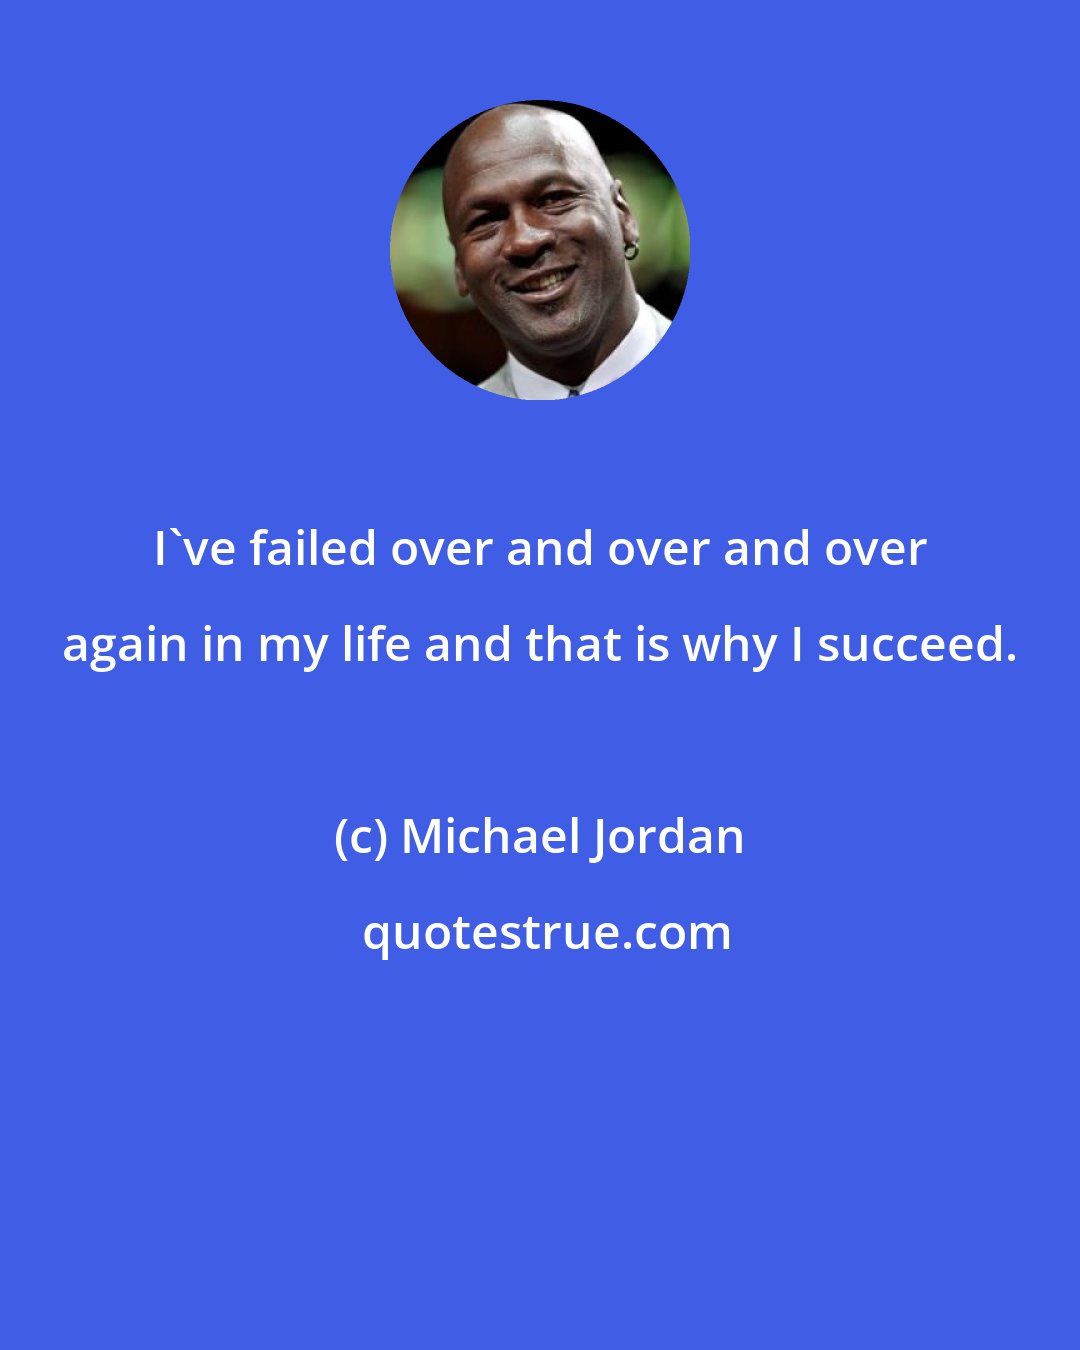 Michael Jordan: I've failed over and over and over again in my life and that is why I succeed.